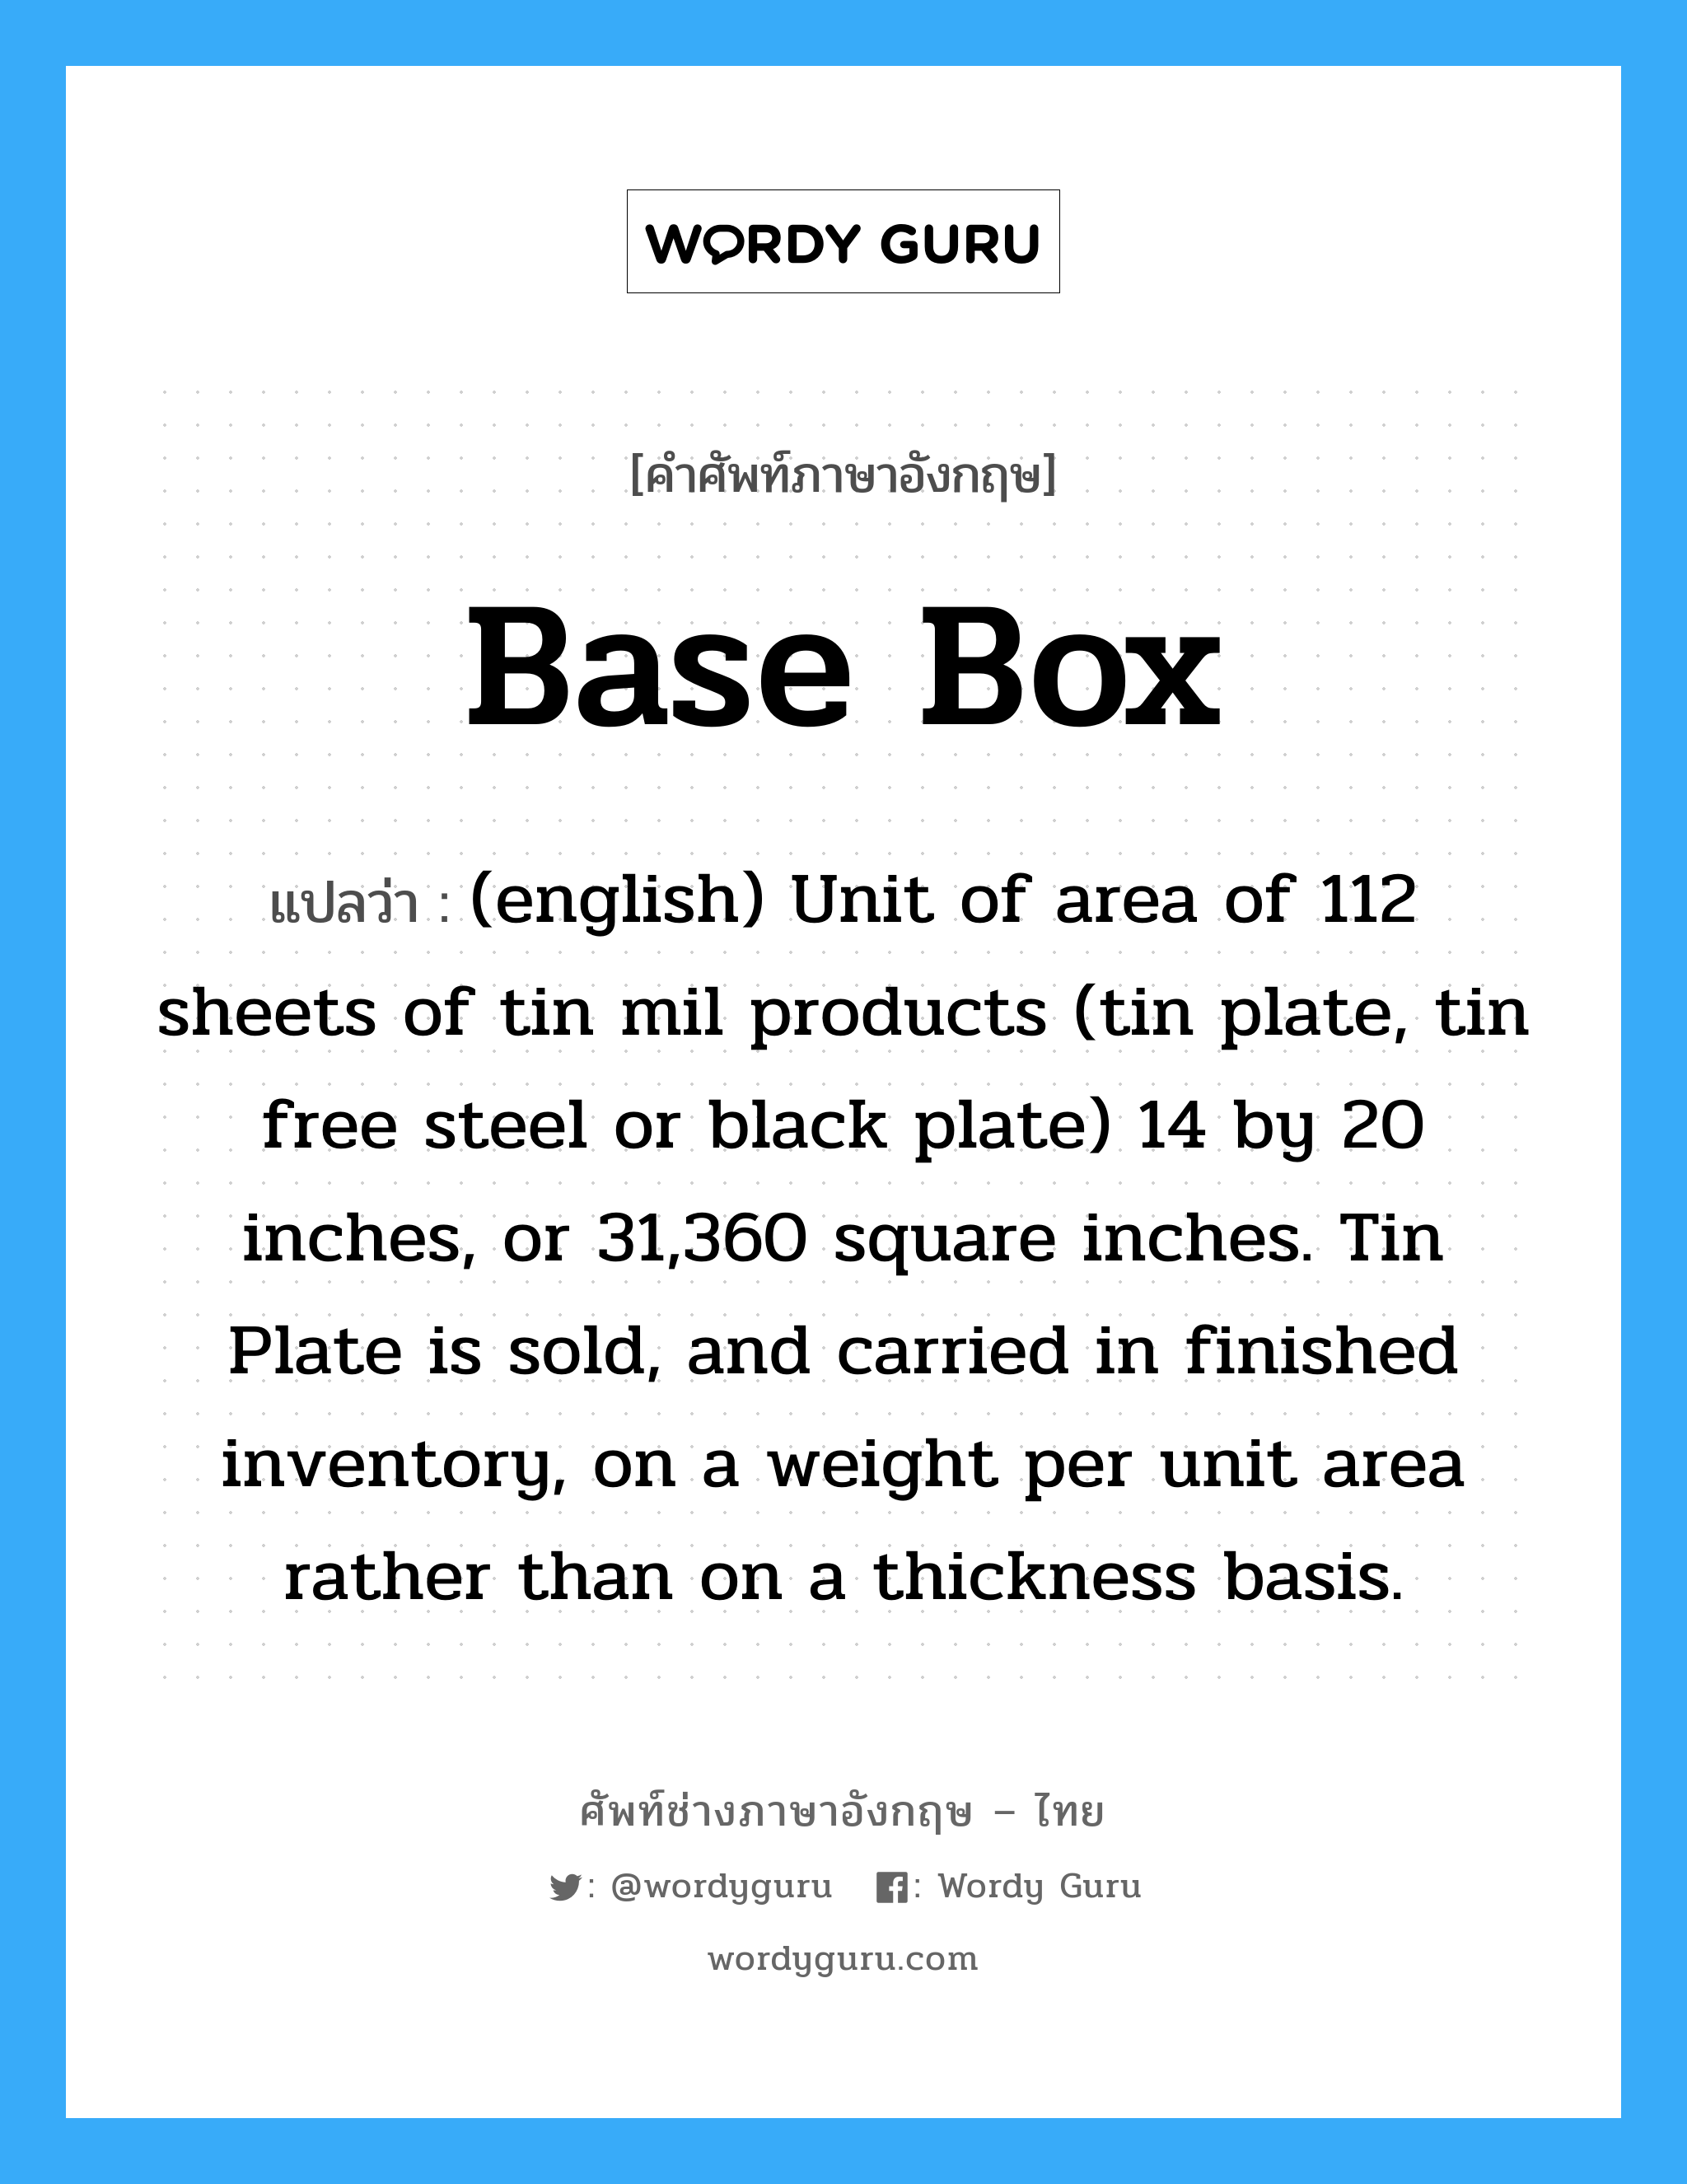 Base Box แปลว่า?, คำศัพท์ช่างภาษาอังกฤษ - ไทย Base Box คำศัพท์ภาษาอังกฤษ Base Box แปลว่า (english) Unit of area of 112 sheets of tin mil products (tin plate, tin free steel or black plate) 14 by 20 inches, or 31,360 square inches. Tin Plate is sold, and carried in finished inventory, on a weight per unit area rather than on a thickness basis.